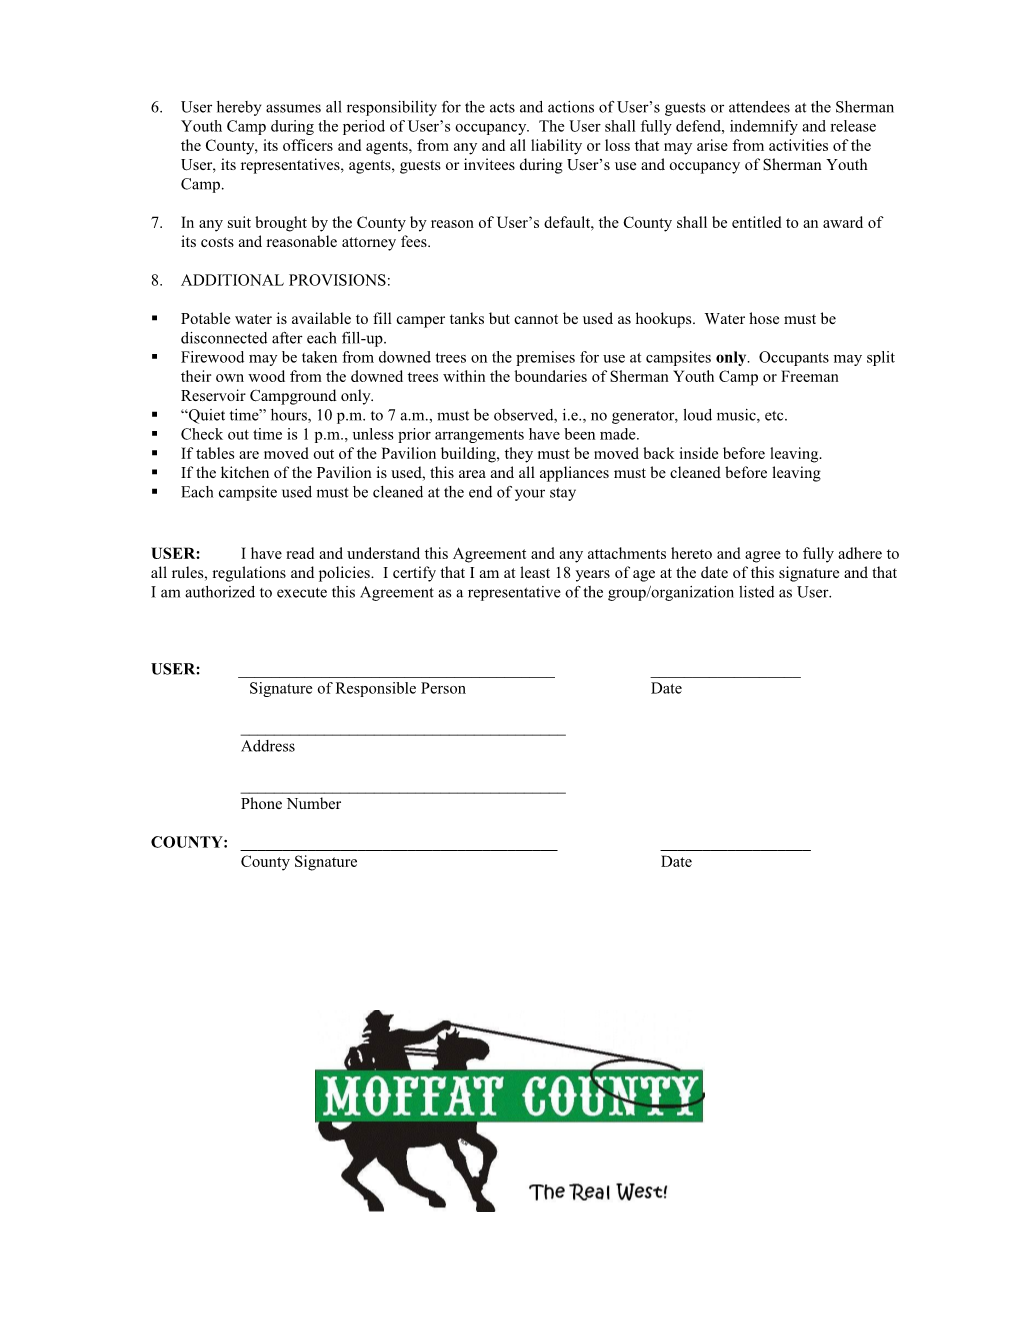 Moffat County Facility Use Agreement